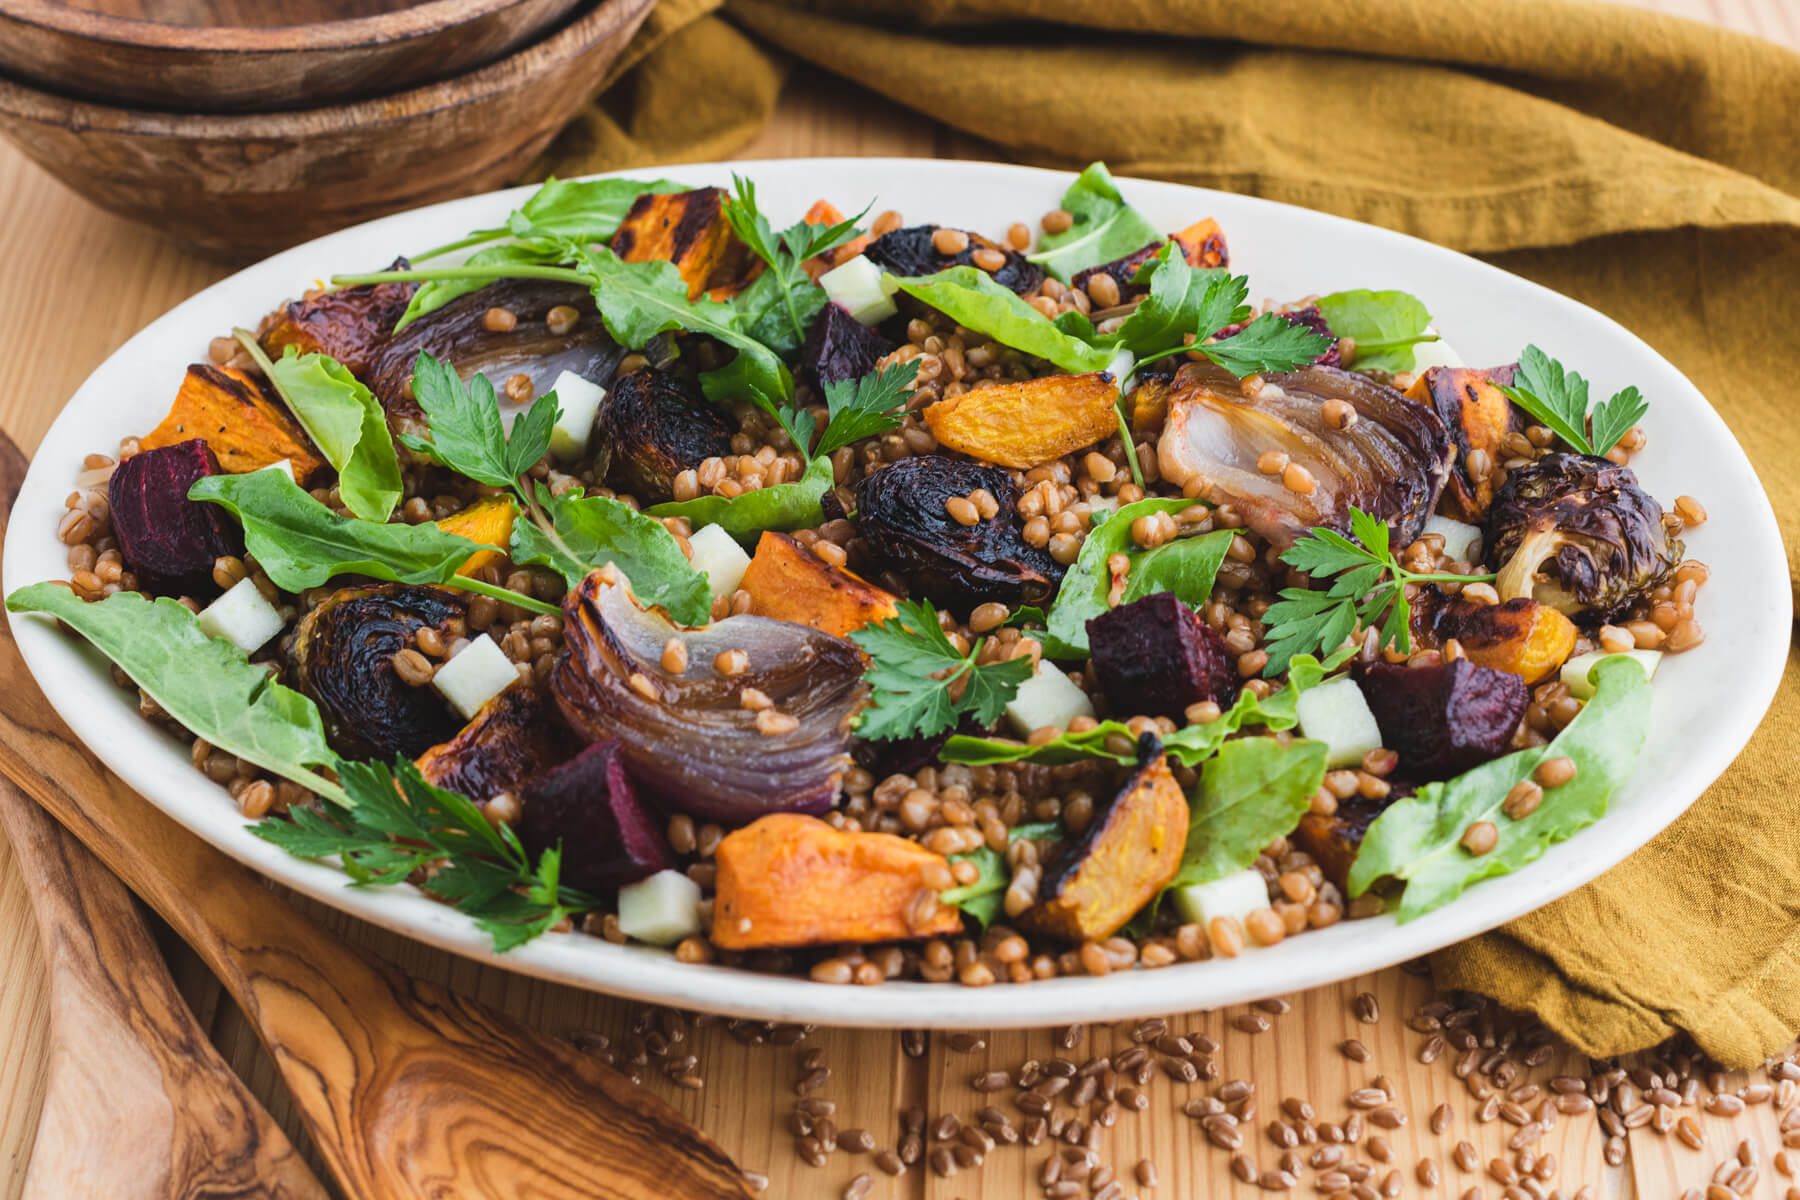 A white serving platter filled with a colourful Harvest Salad featuring roasted beets, onions, Brussels sprouts, and wheat berries.